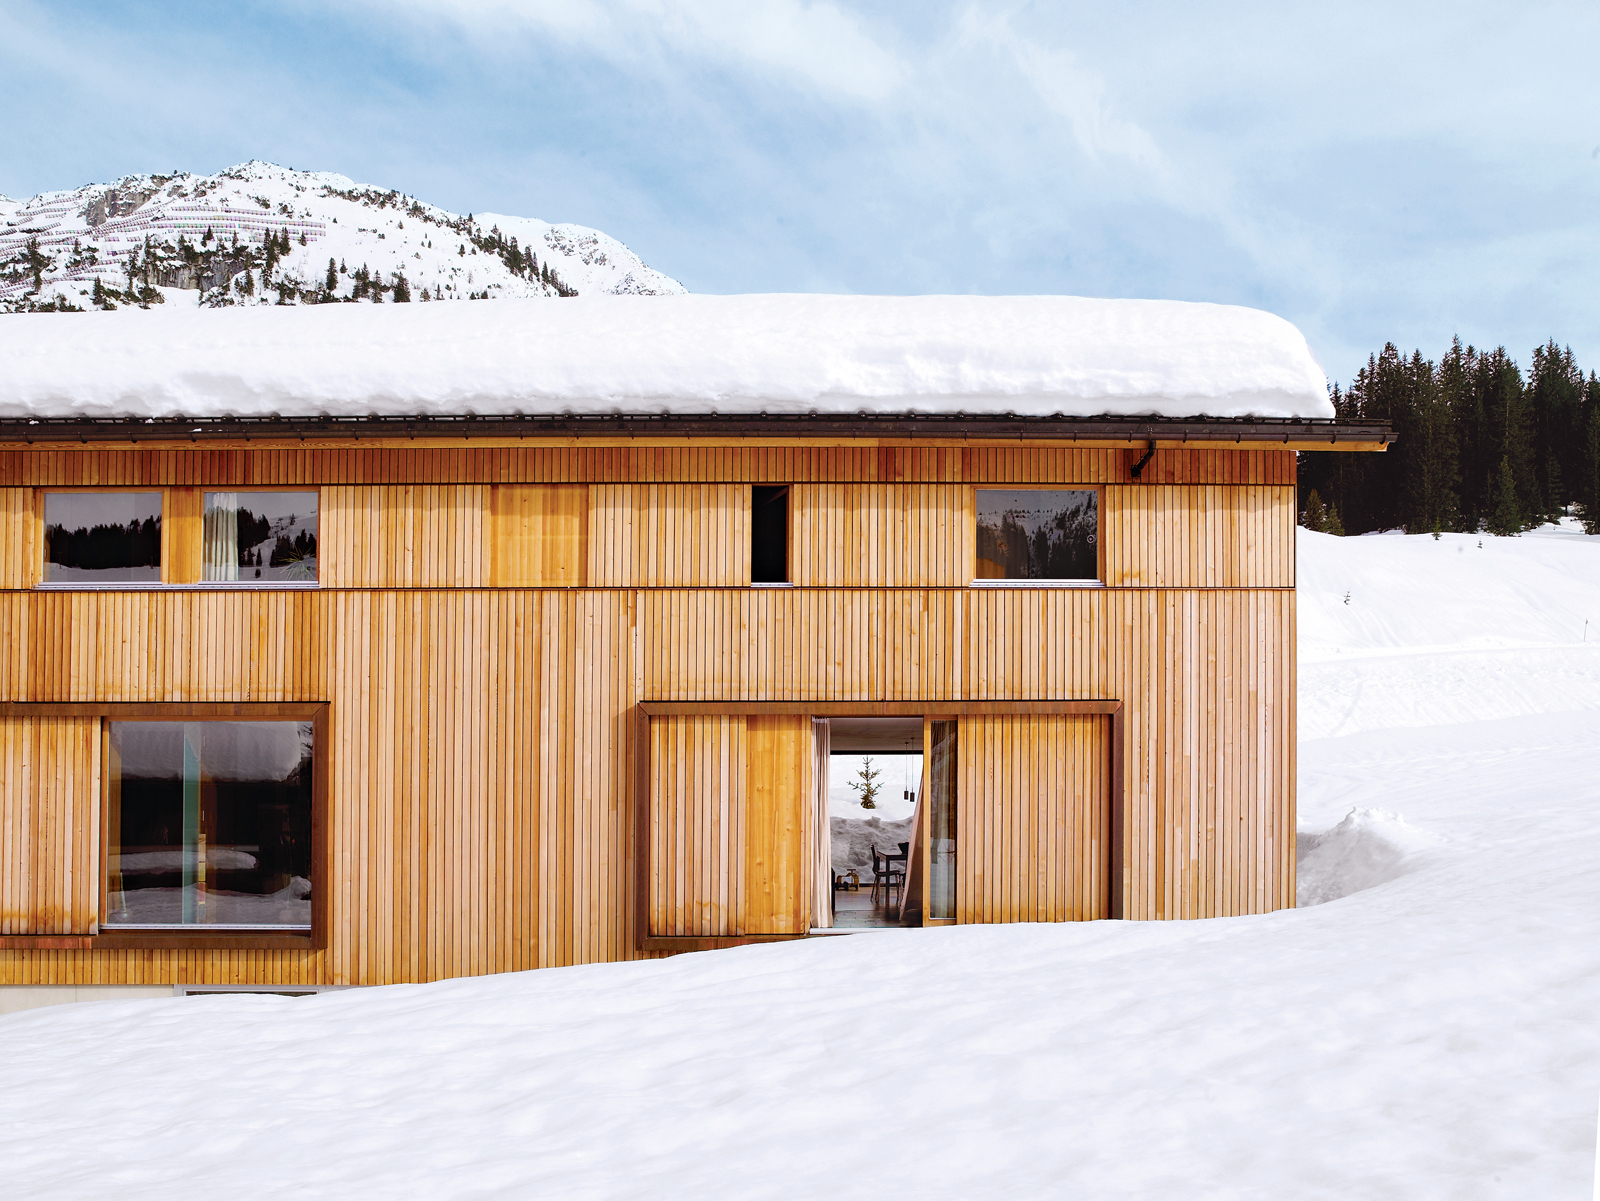 The house, which is gently pushed into the hillside, has a large basement holding a garage, ski room, storage areas, and utility spaces as well as the entrance hall.